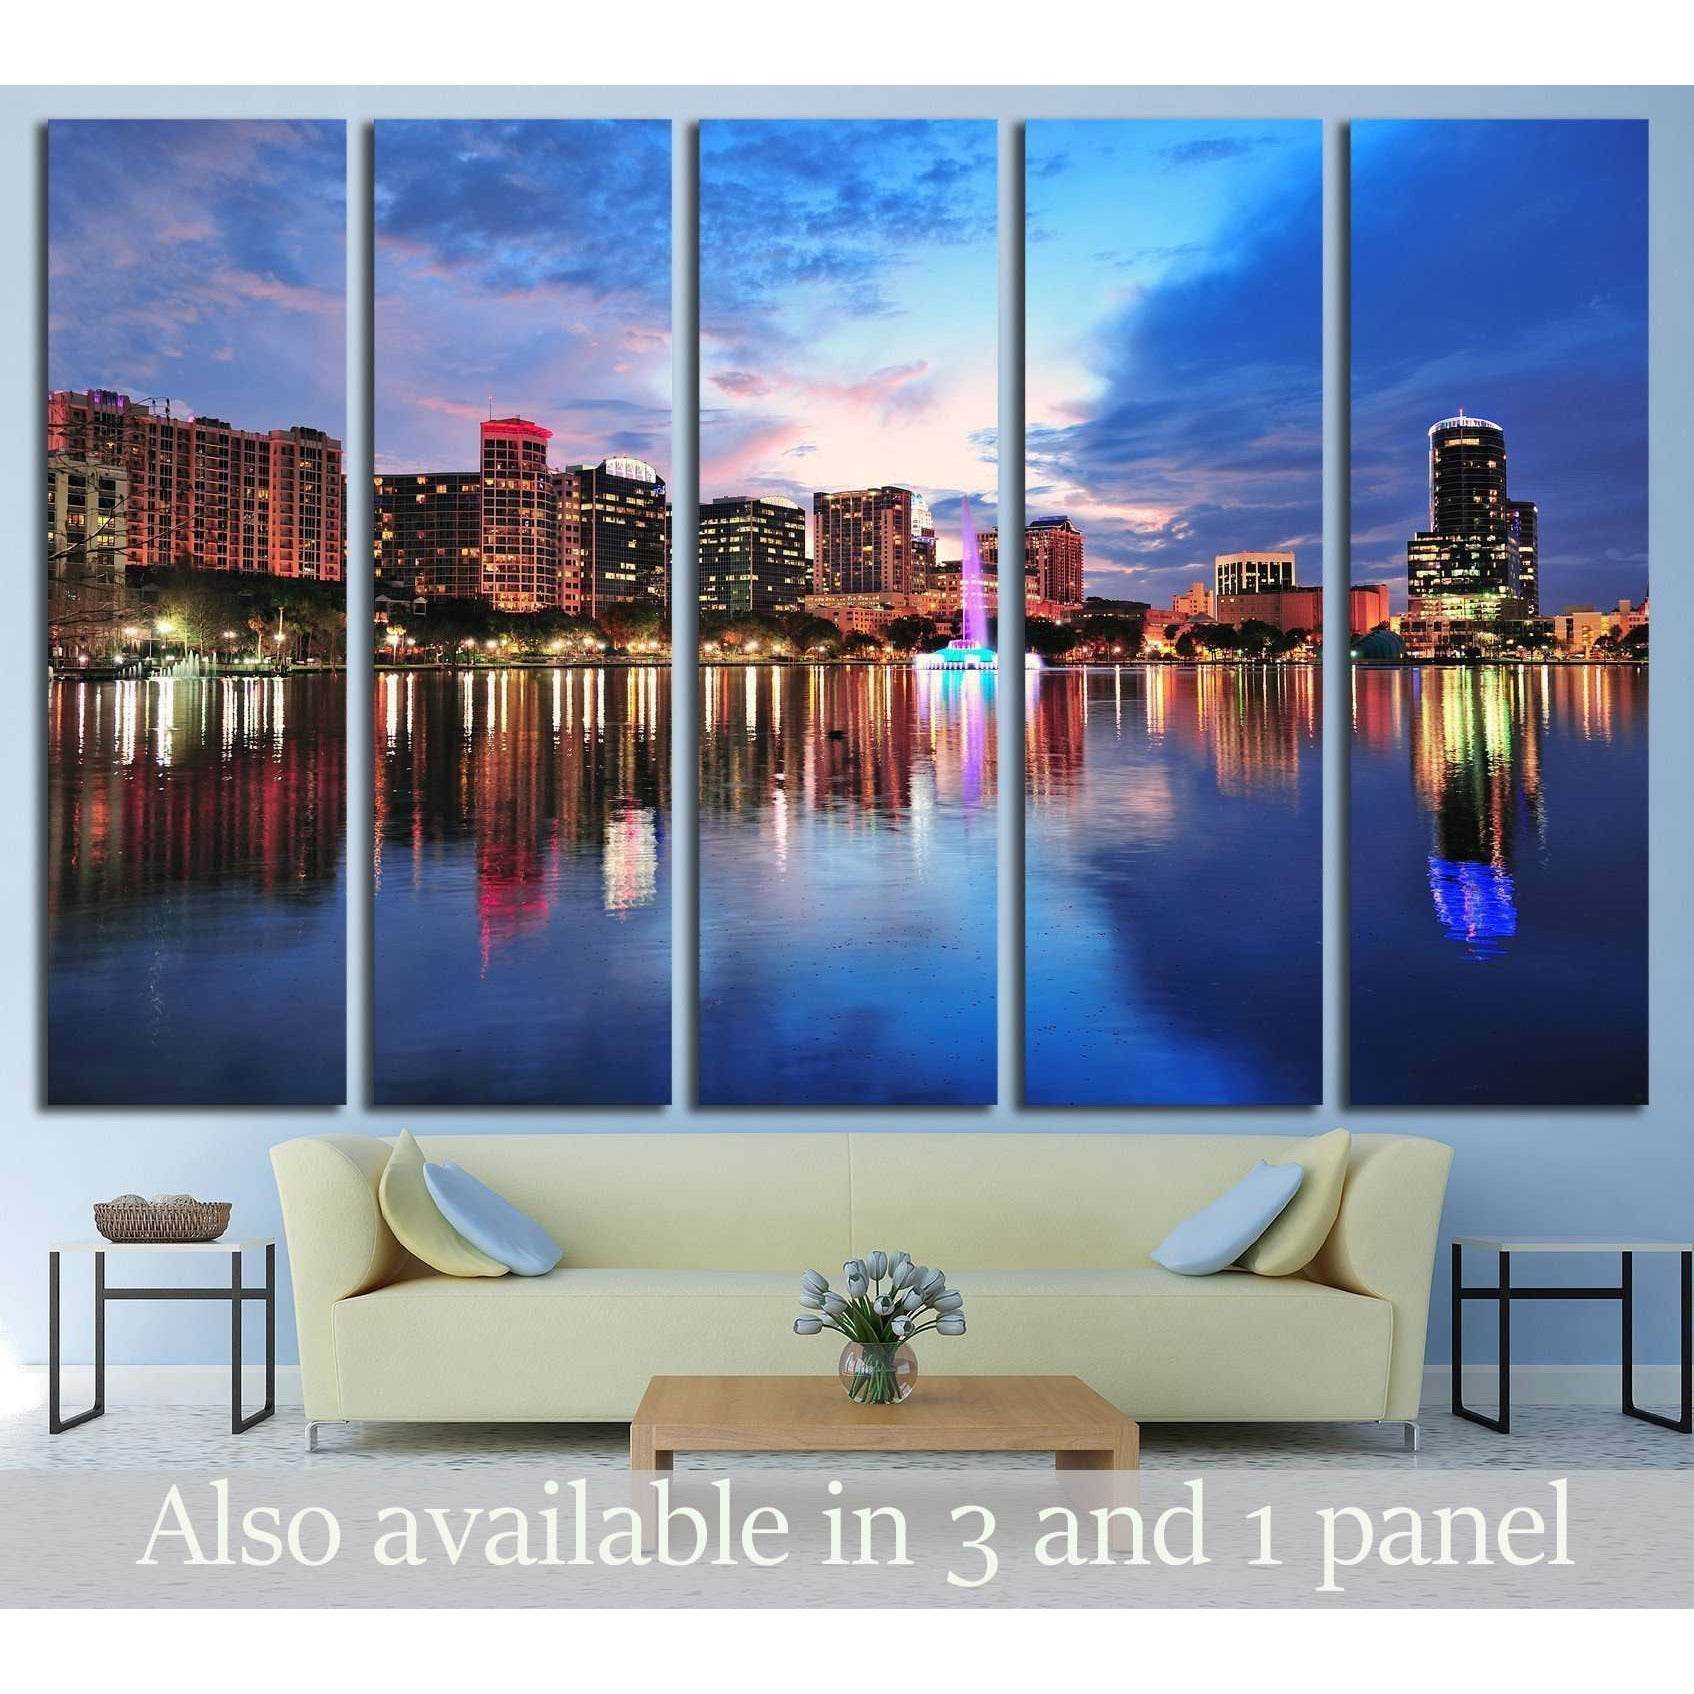 Orlando skyline over Lake Eola at dusk with urban skyscrapers №1671 Ready to Hang Canvas Print